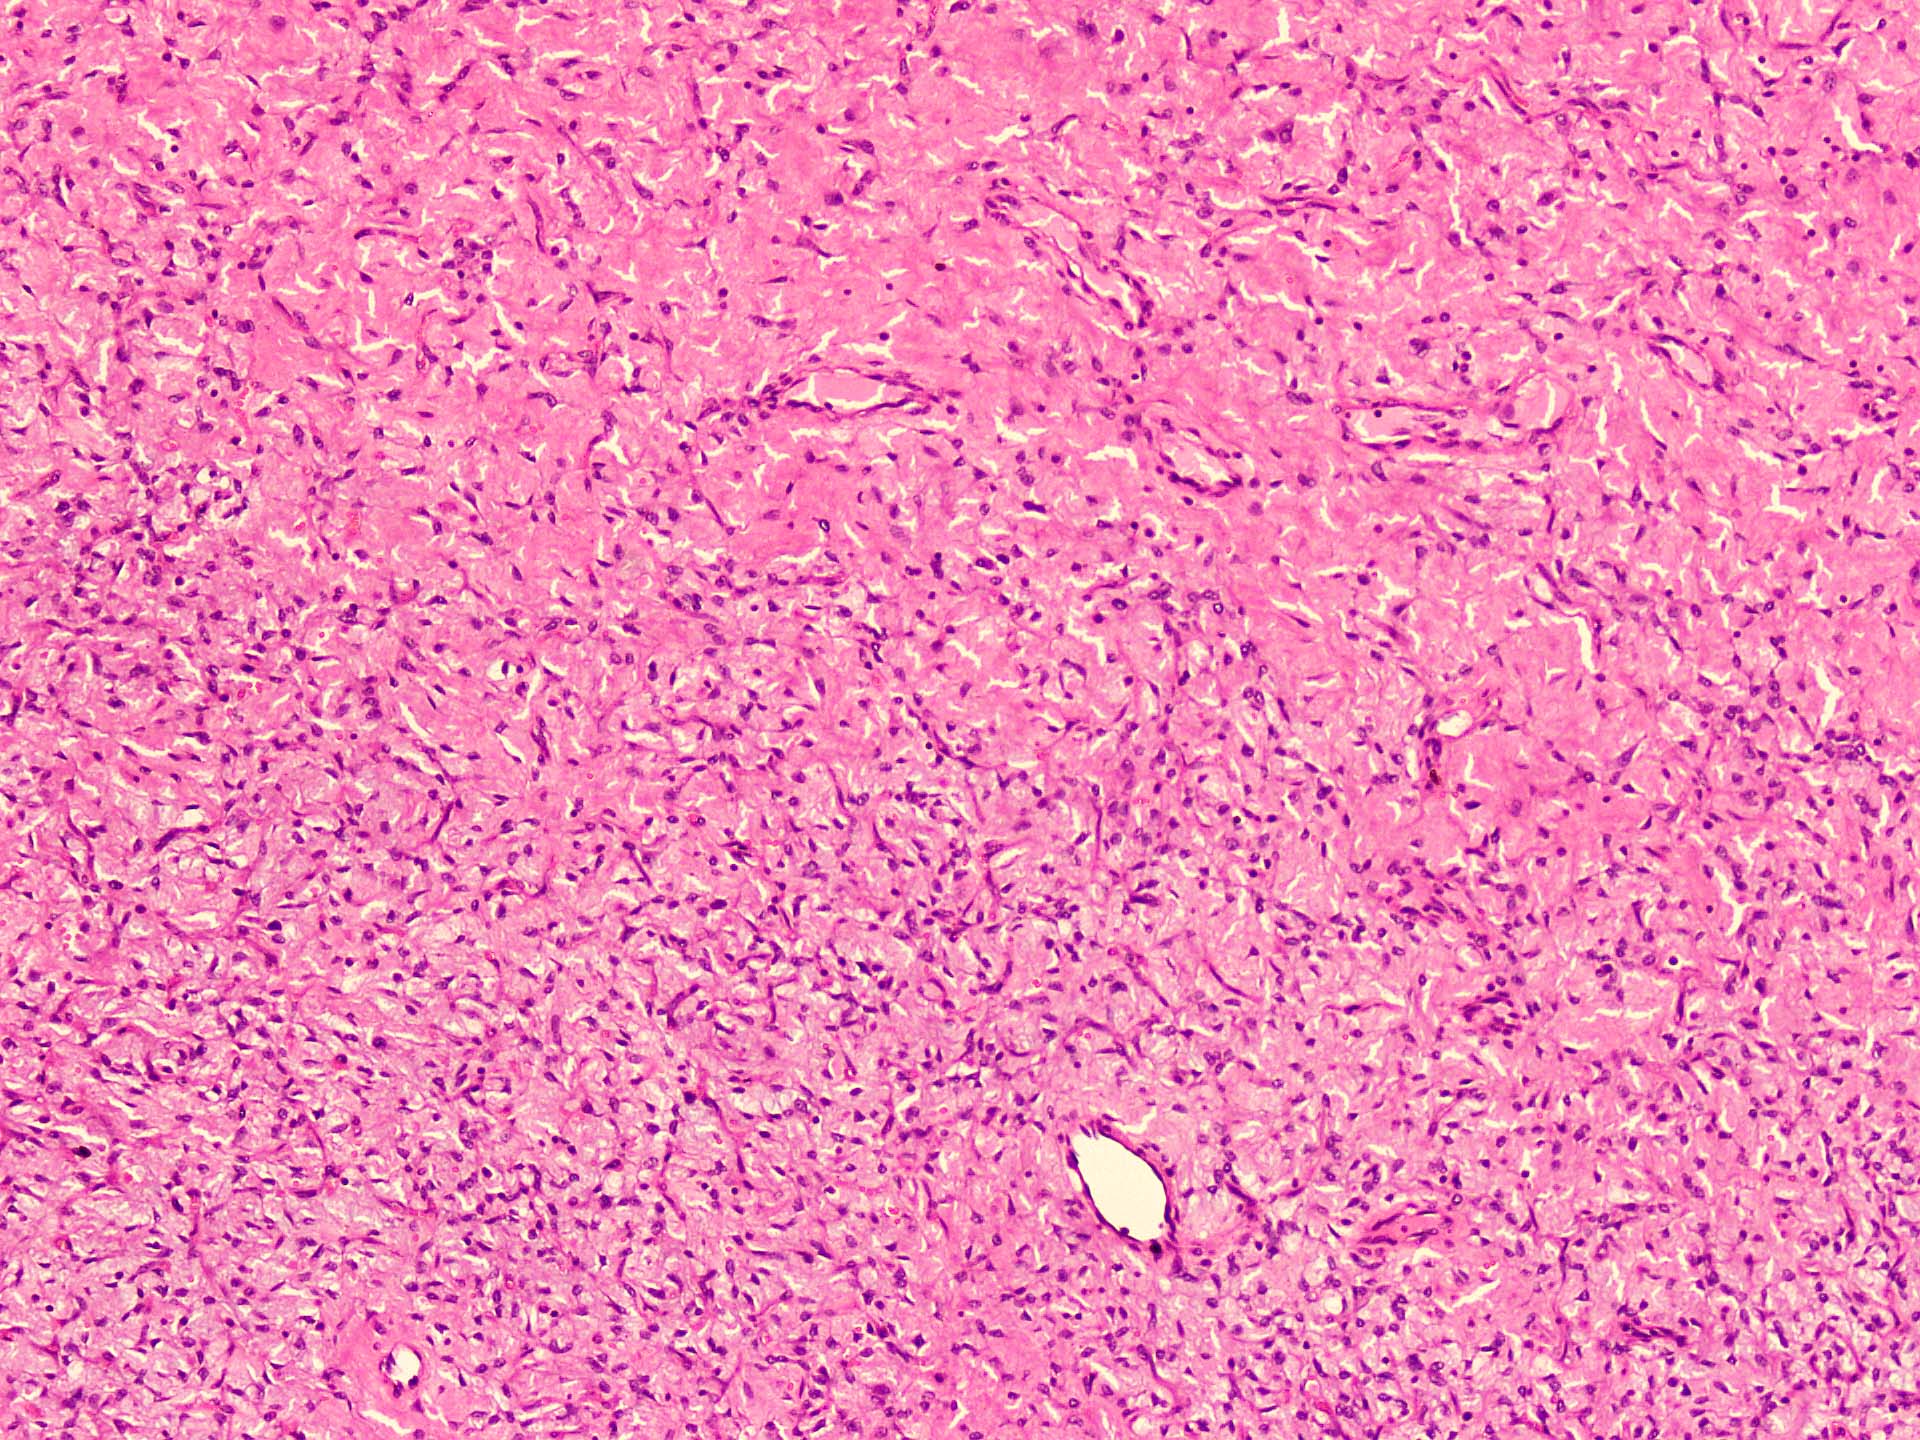 Spindle cell neoplasm with occasional ectatic vessels